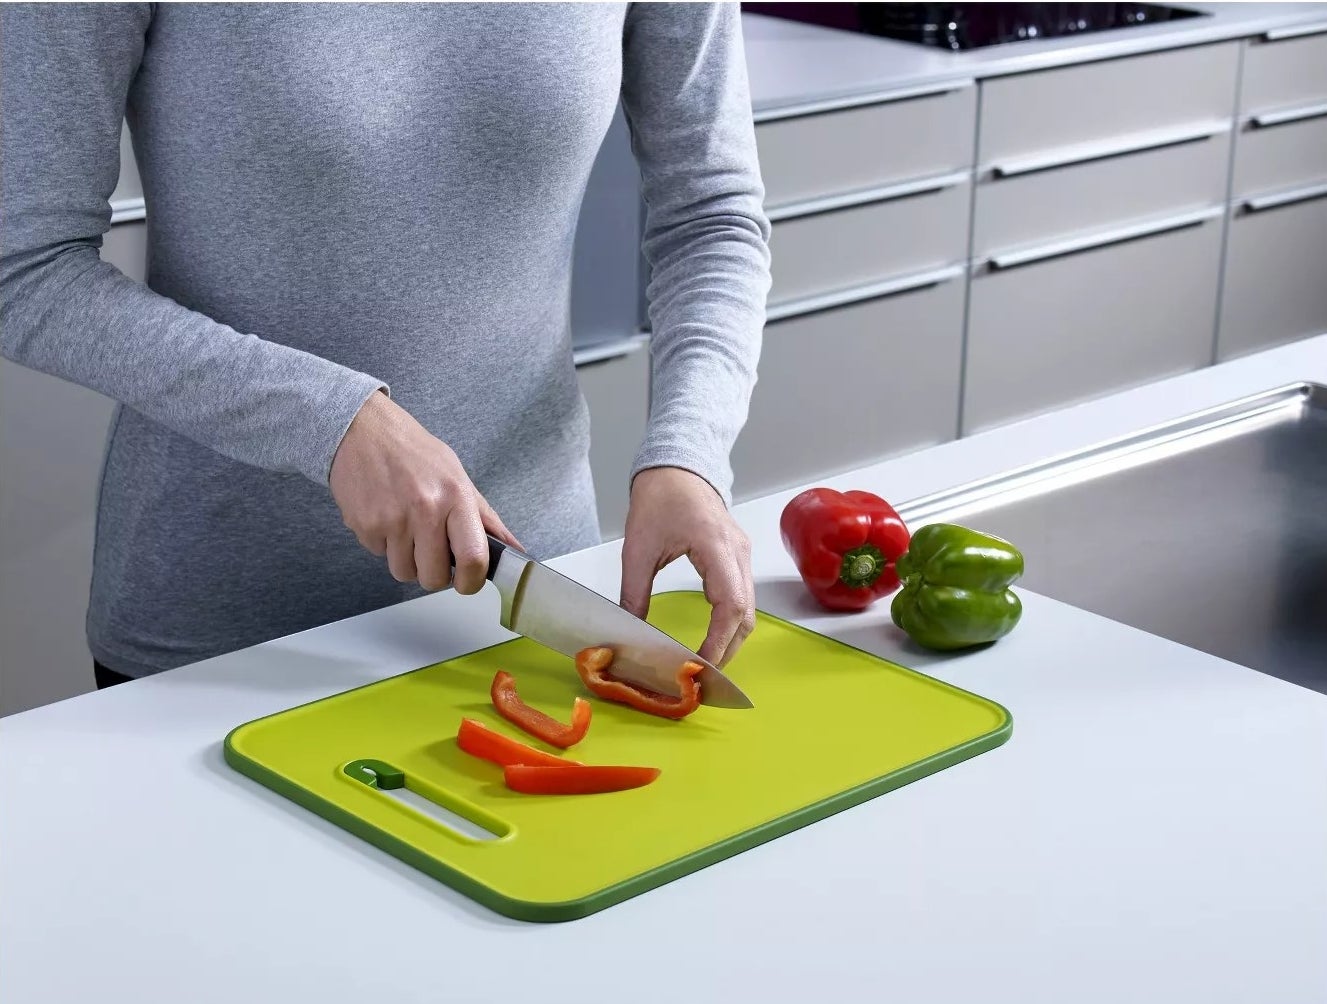 A model slicing vegetables on the cutting board